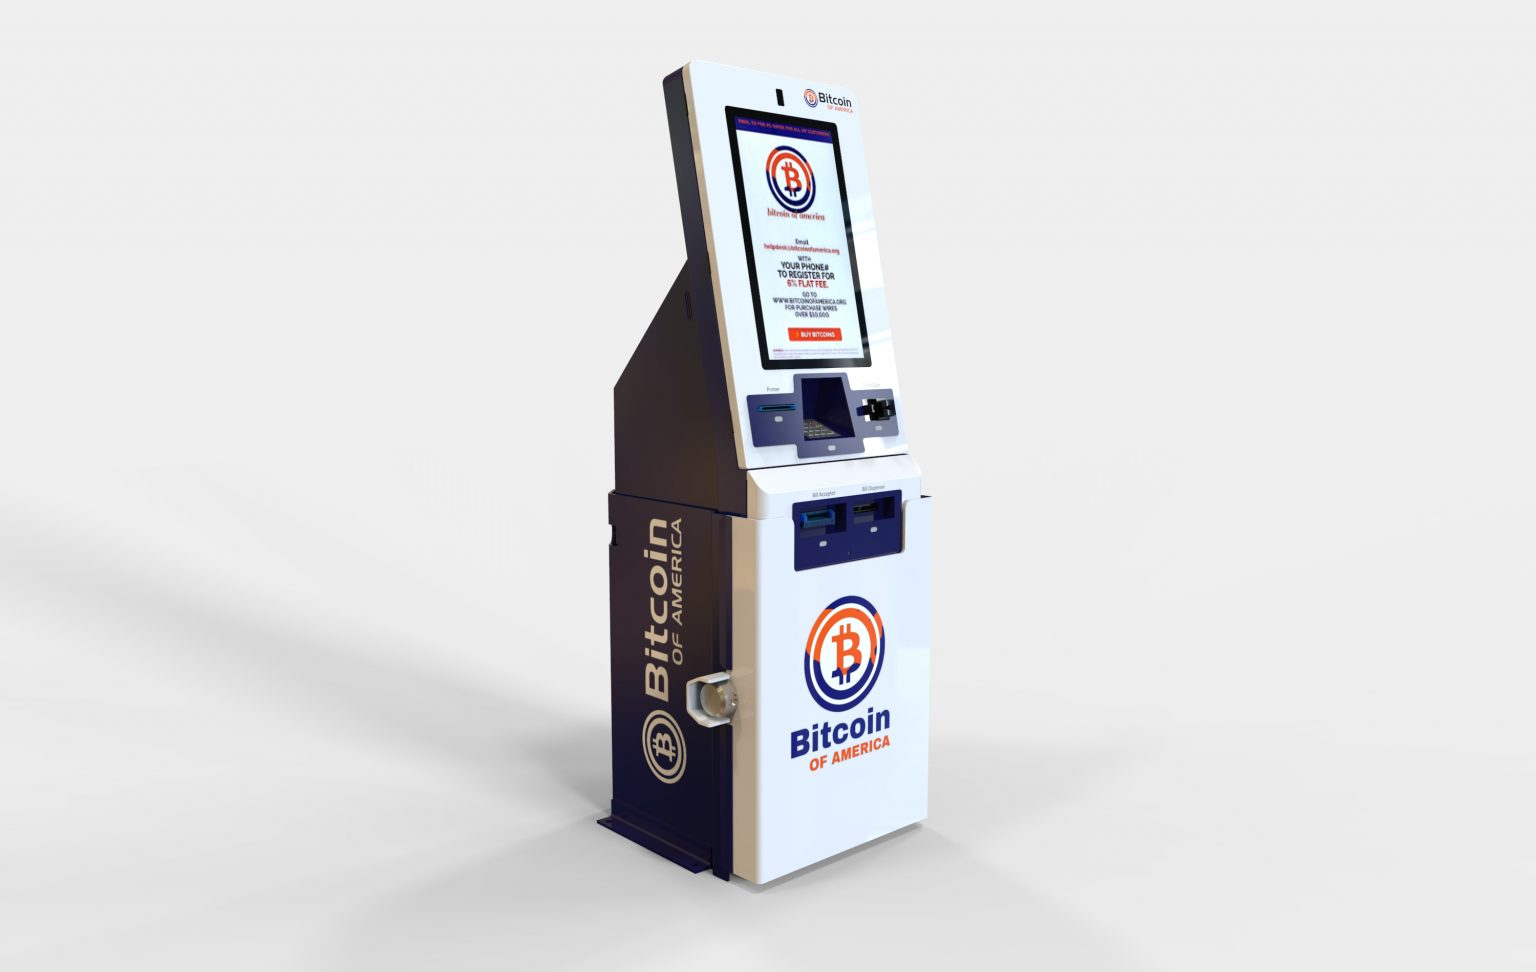 Product image of a Bitcoin of America kiosk. Source: Bitcoin of America